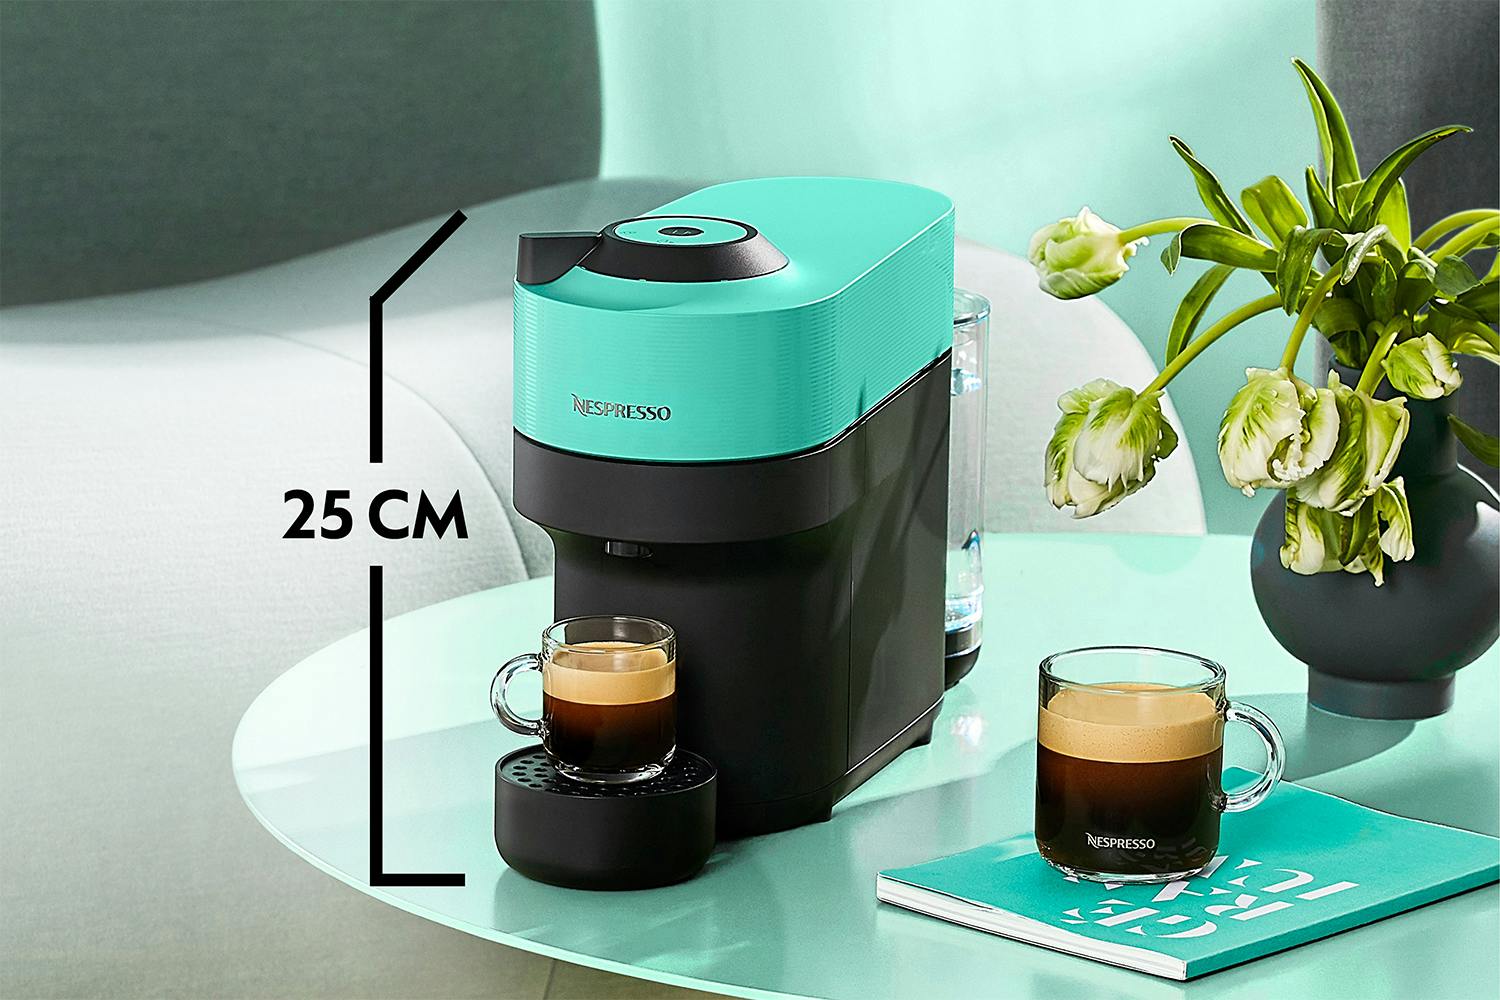 Move over Nike! Nespresso just launched a Tiffany Blue Vertuo Pop